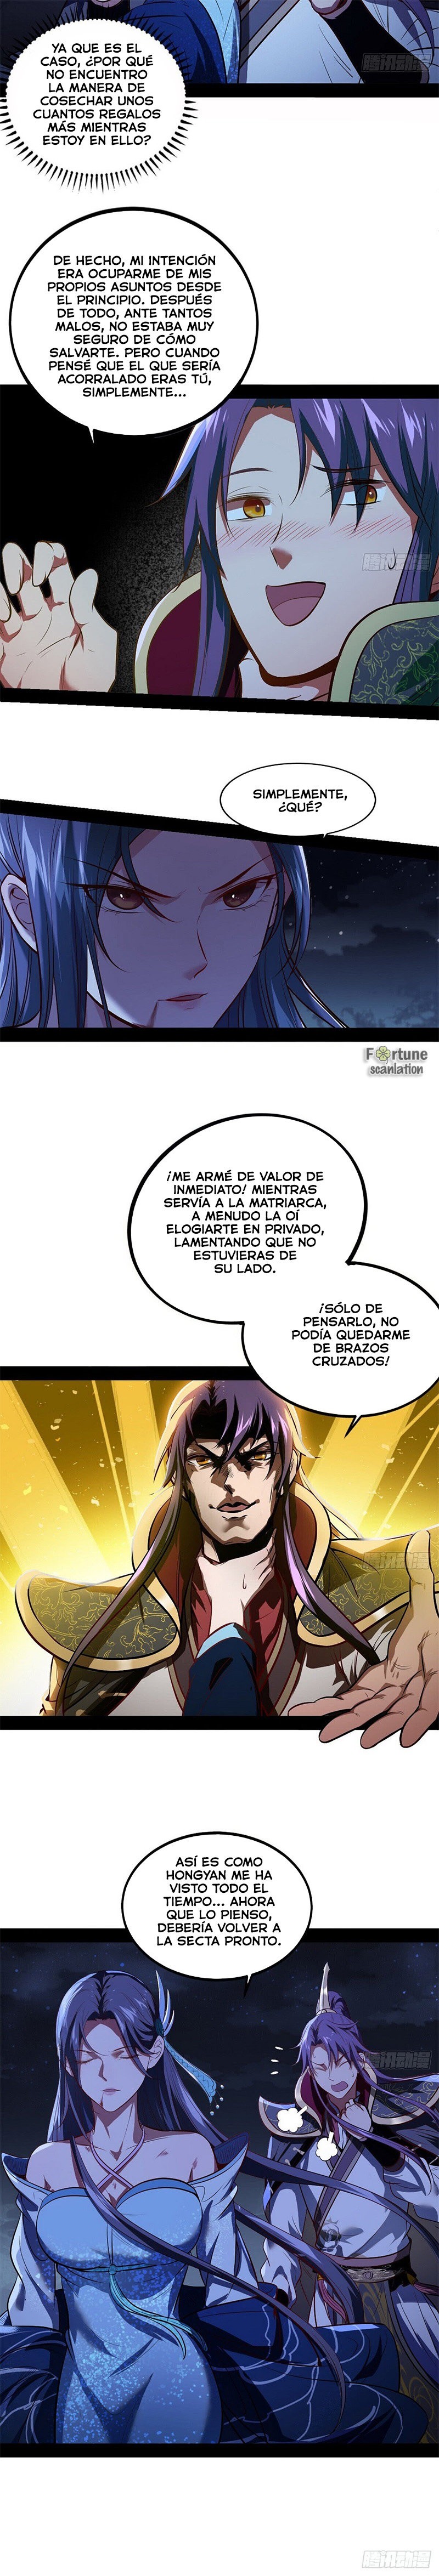 Manga Soy un dios maligno Chapter 39 image number 7